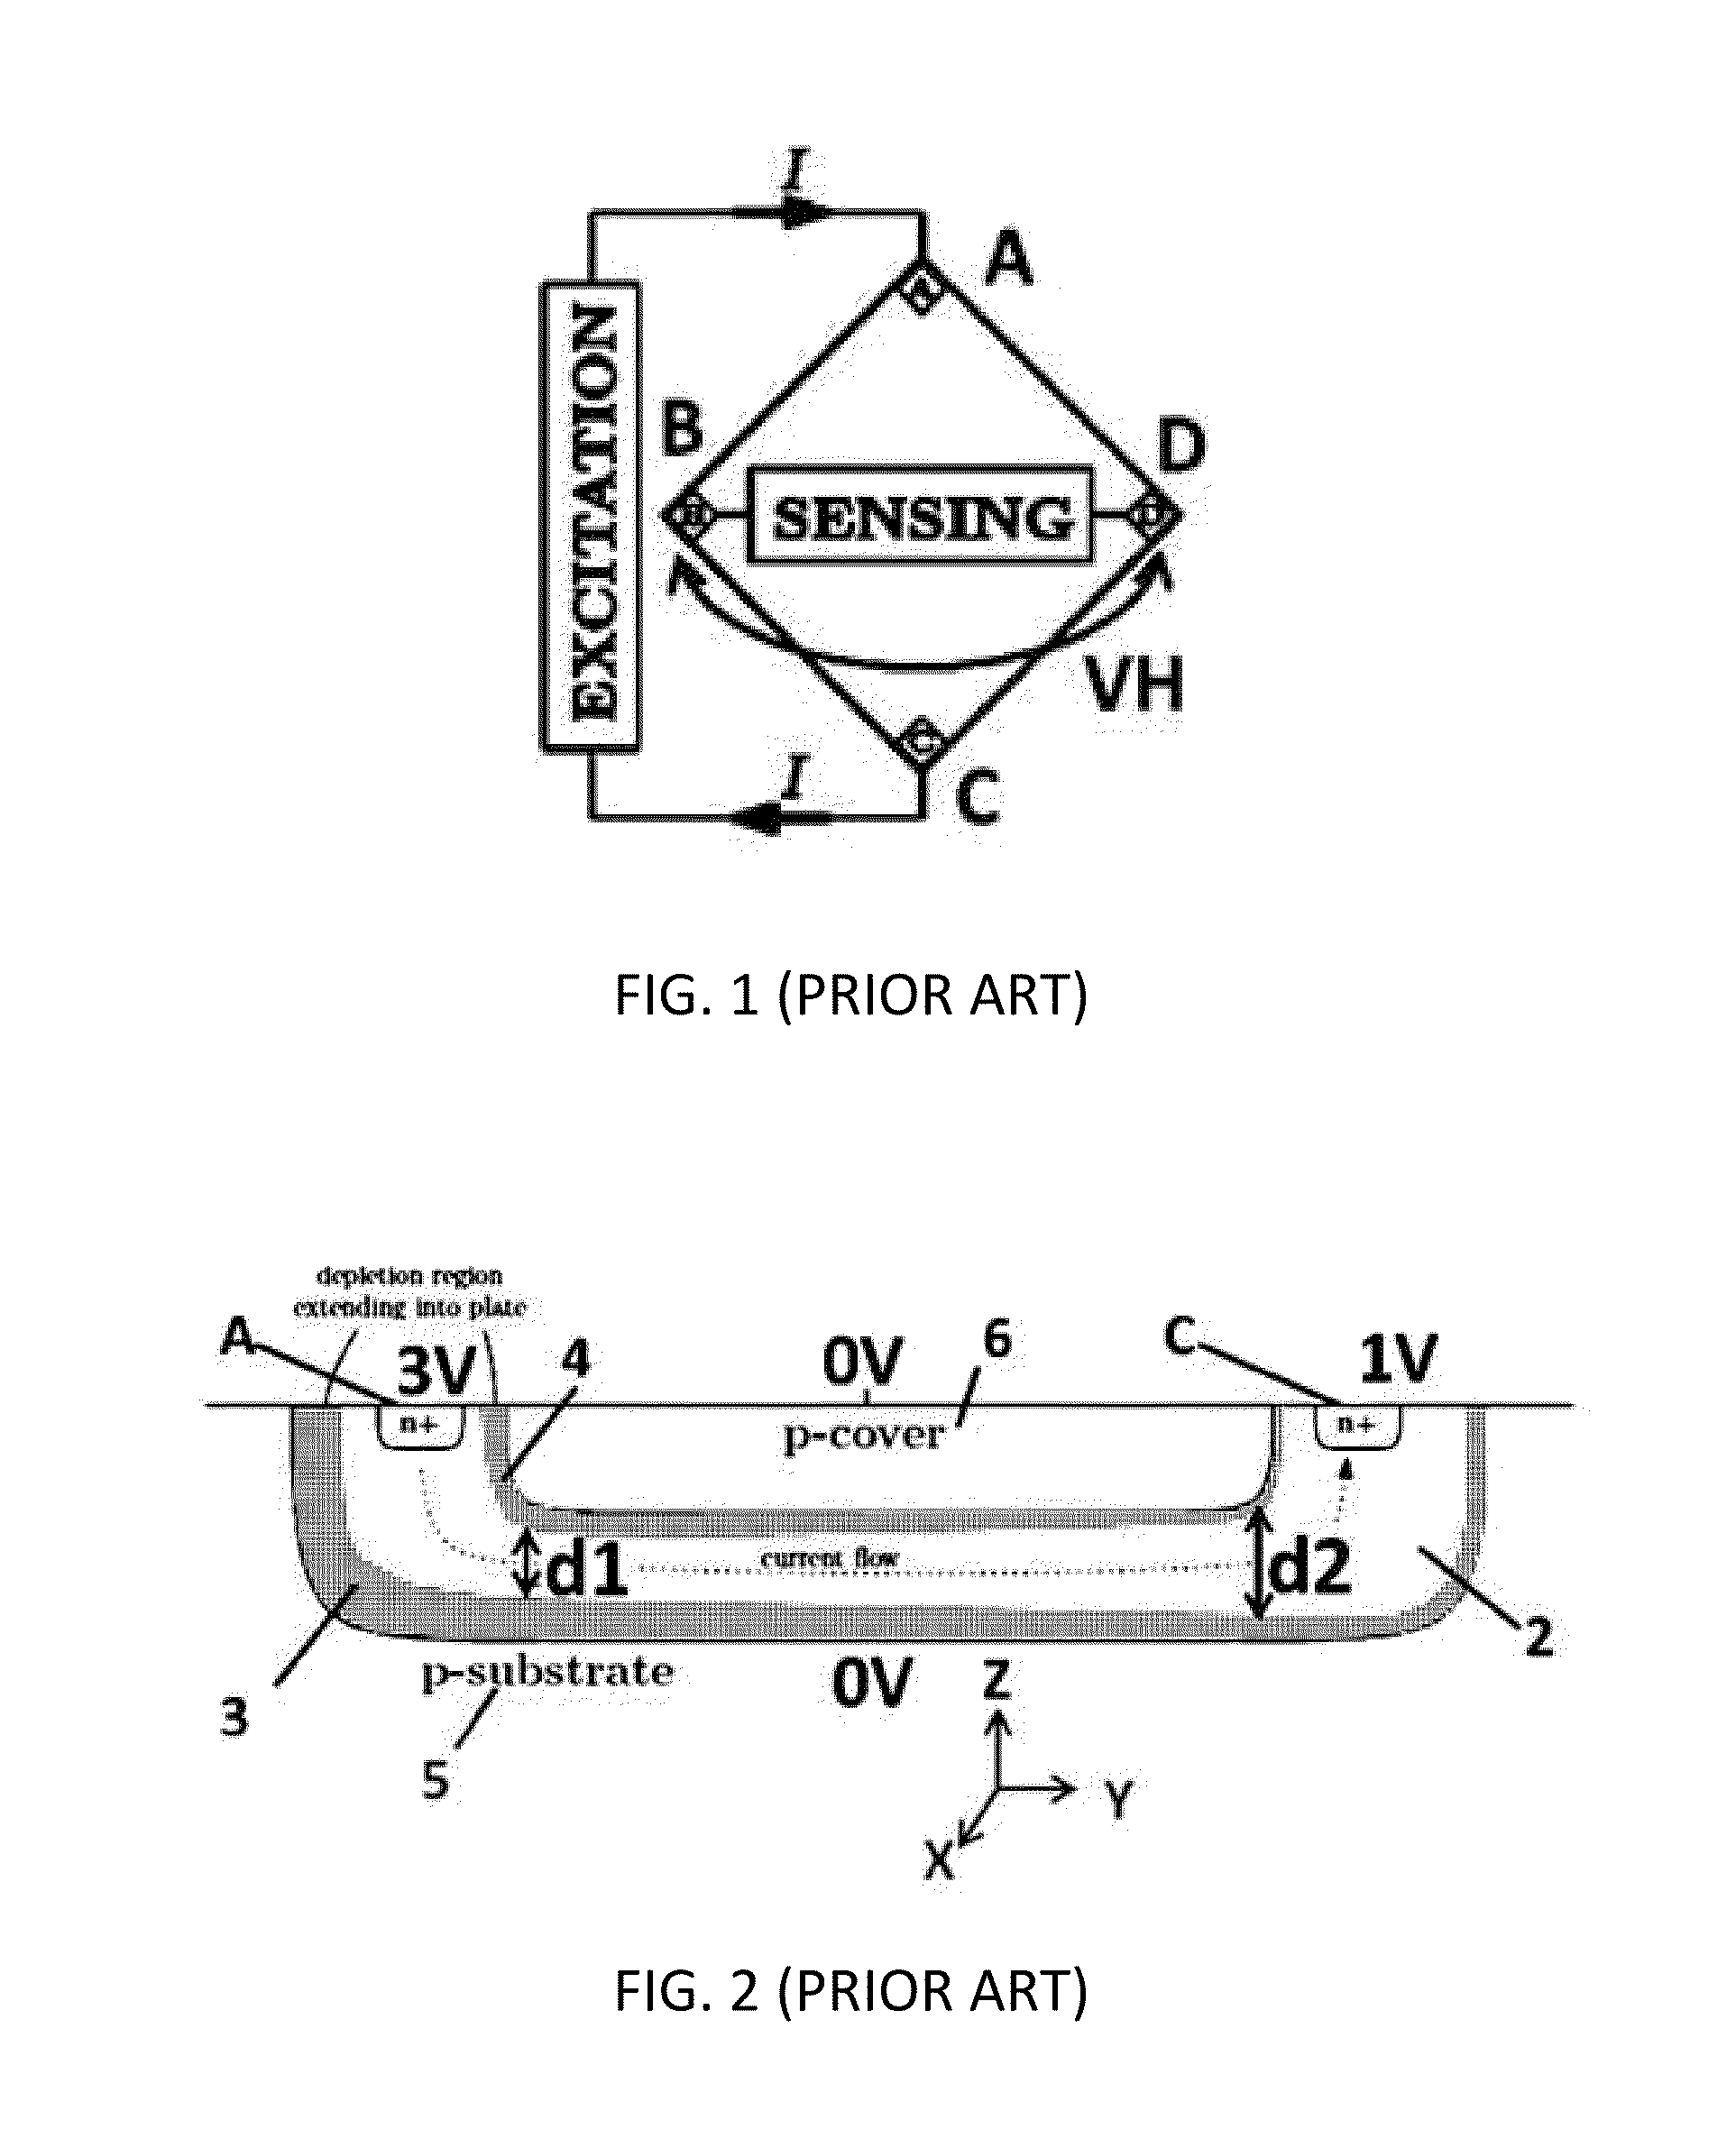 Hall Sensor Readout System with Offset Determination Using the Hall Element Itself